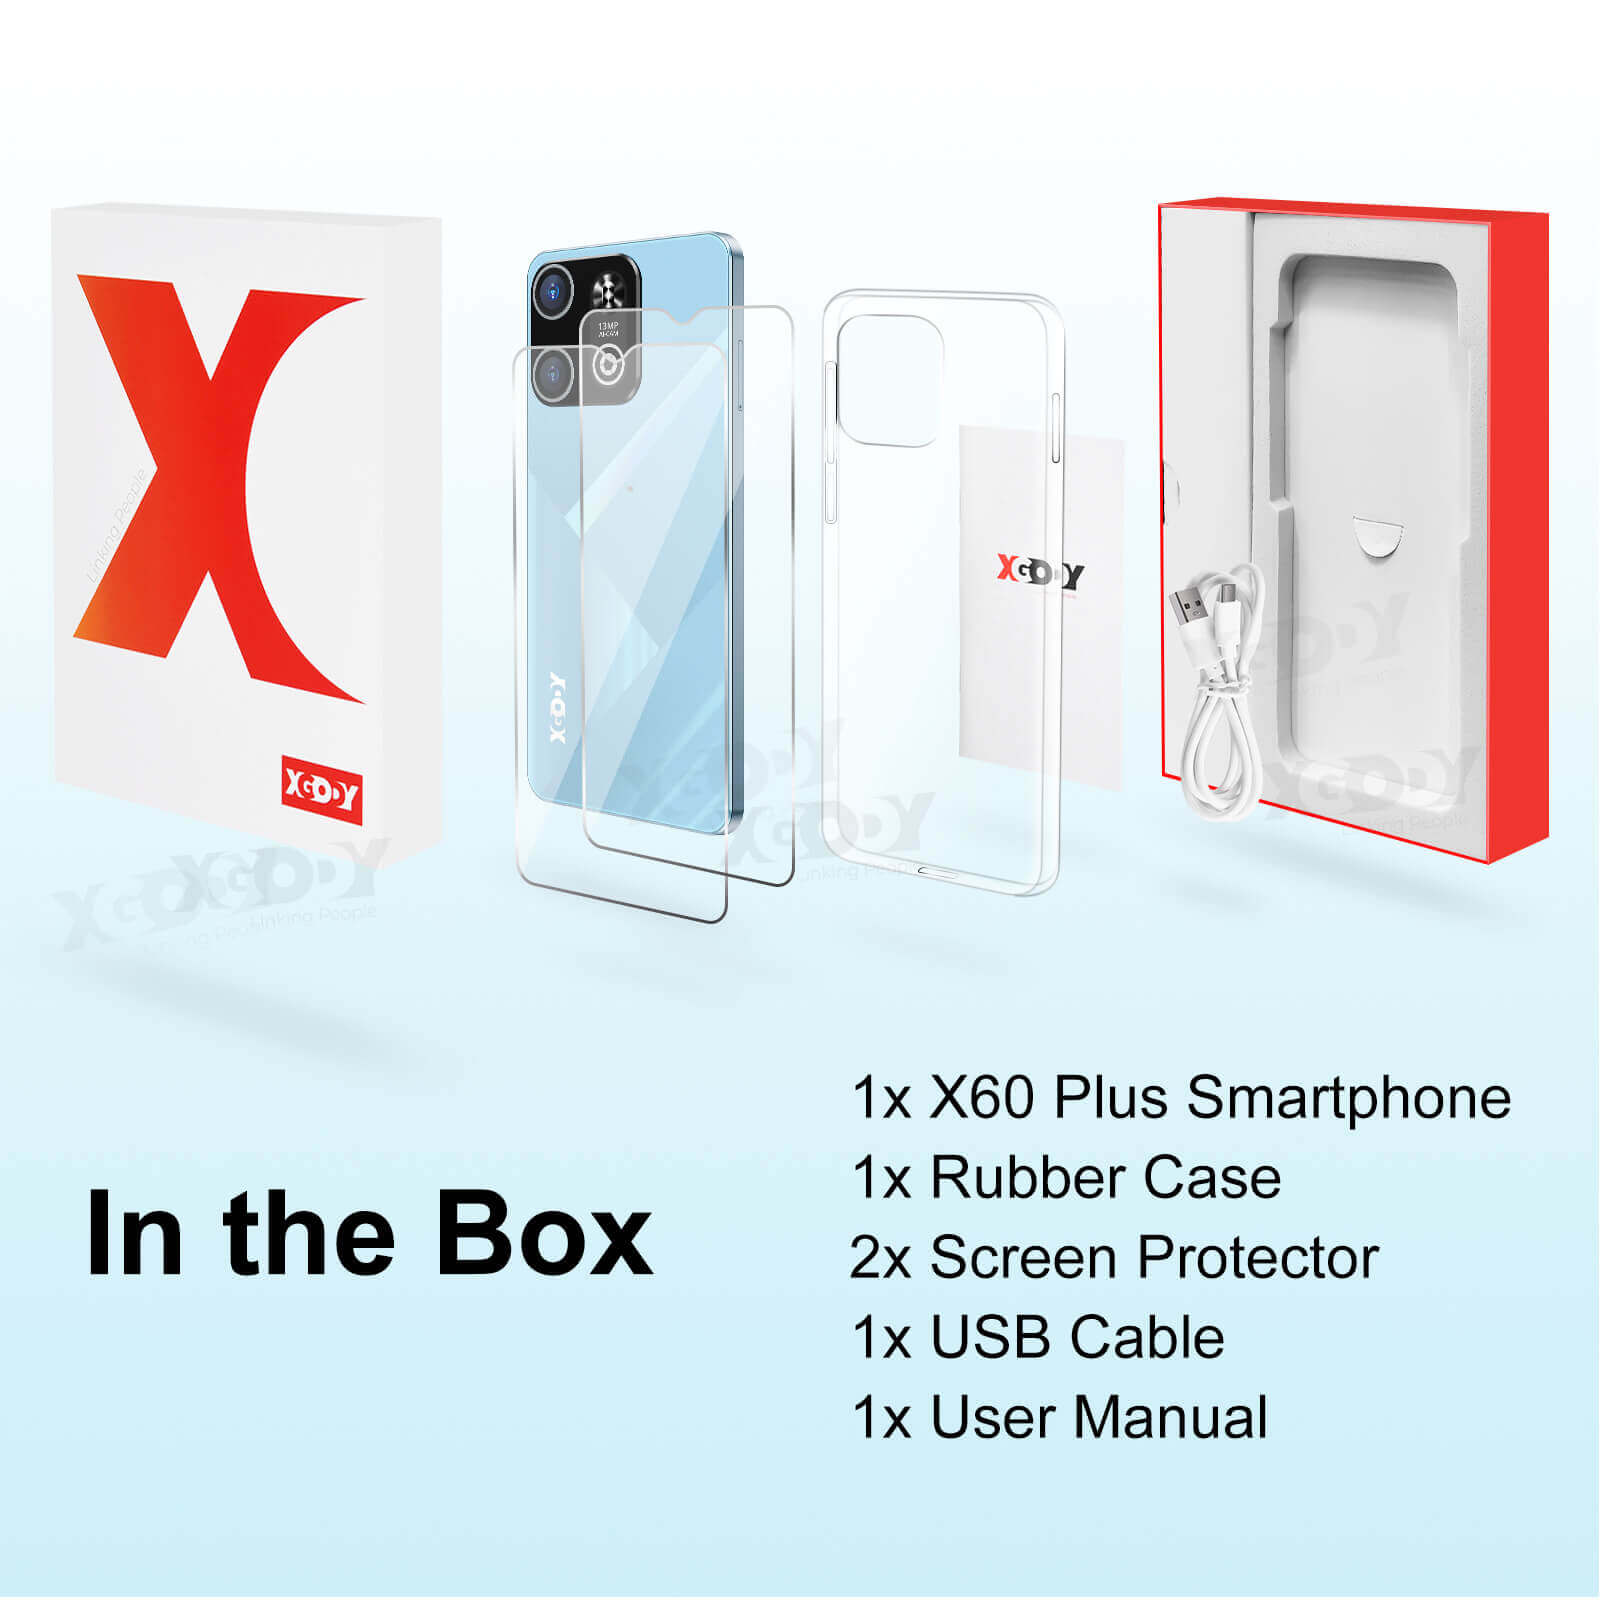 Cost-effective and Most worthwhile XGODY X60 Plus 6.5" Android 4G LTE Cell Phone With Dual SIM Phones Unlocked - XGODY 